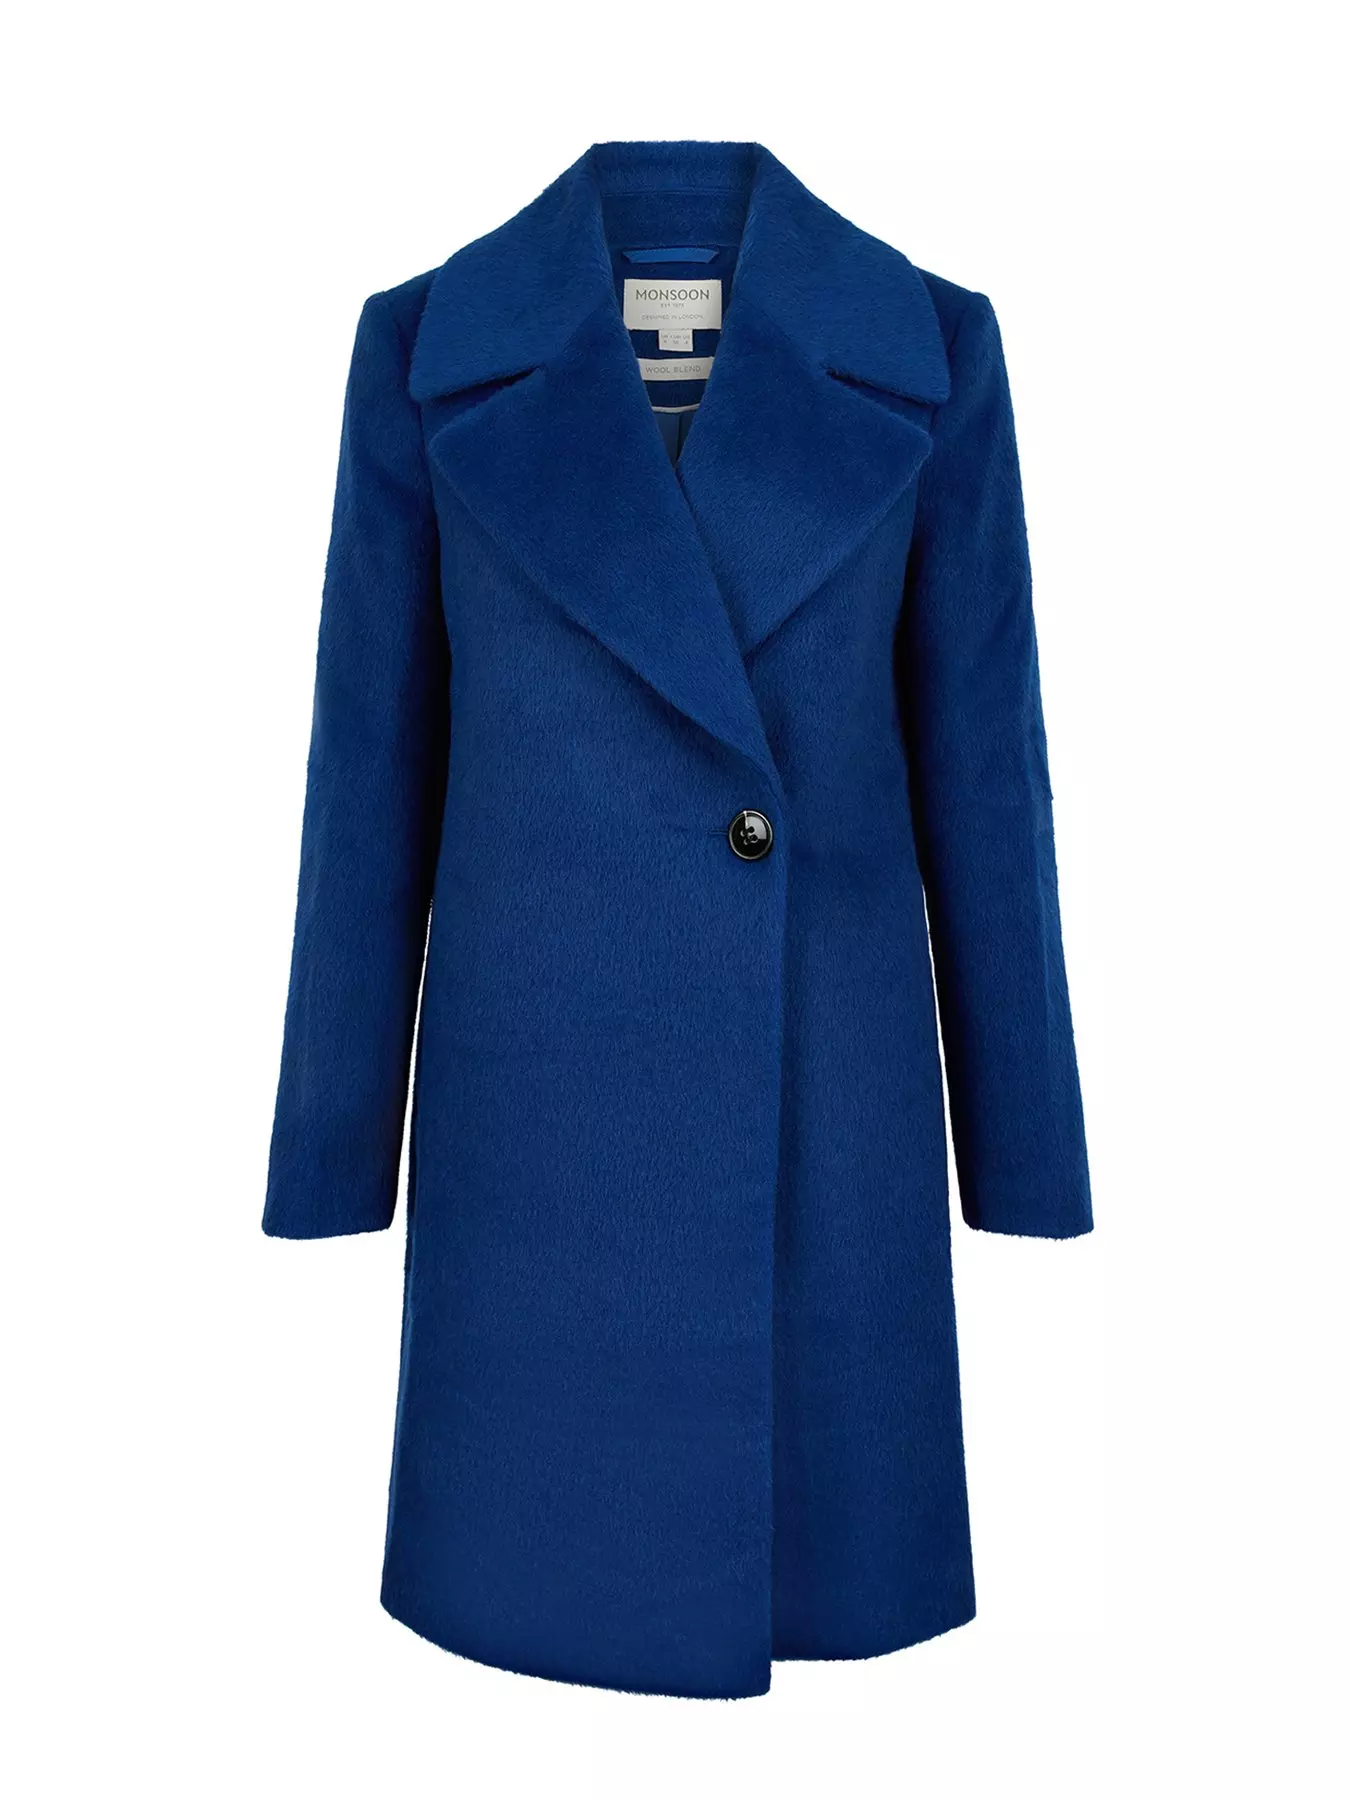 Latest Offers Www Littlewoods Com - color changing trench coat favorite roblox color coat